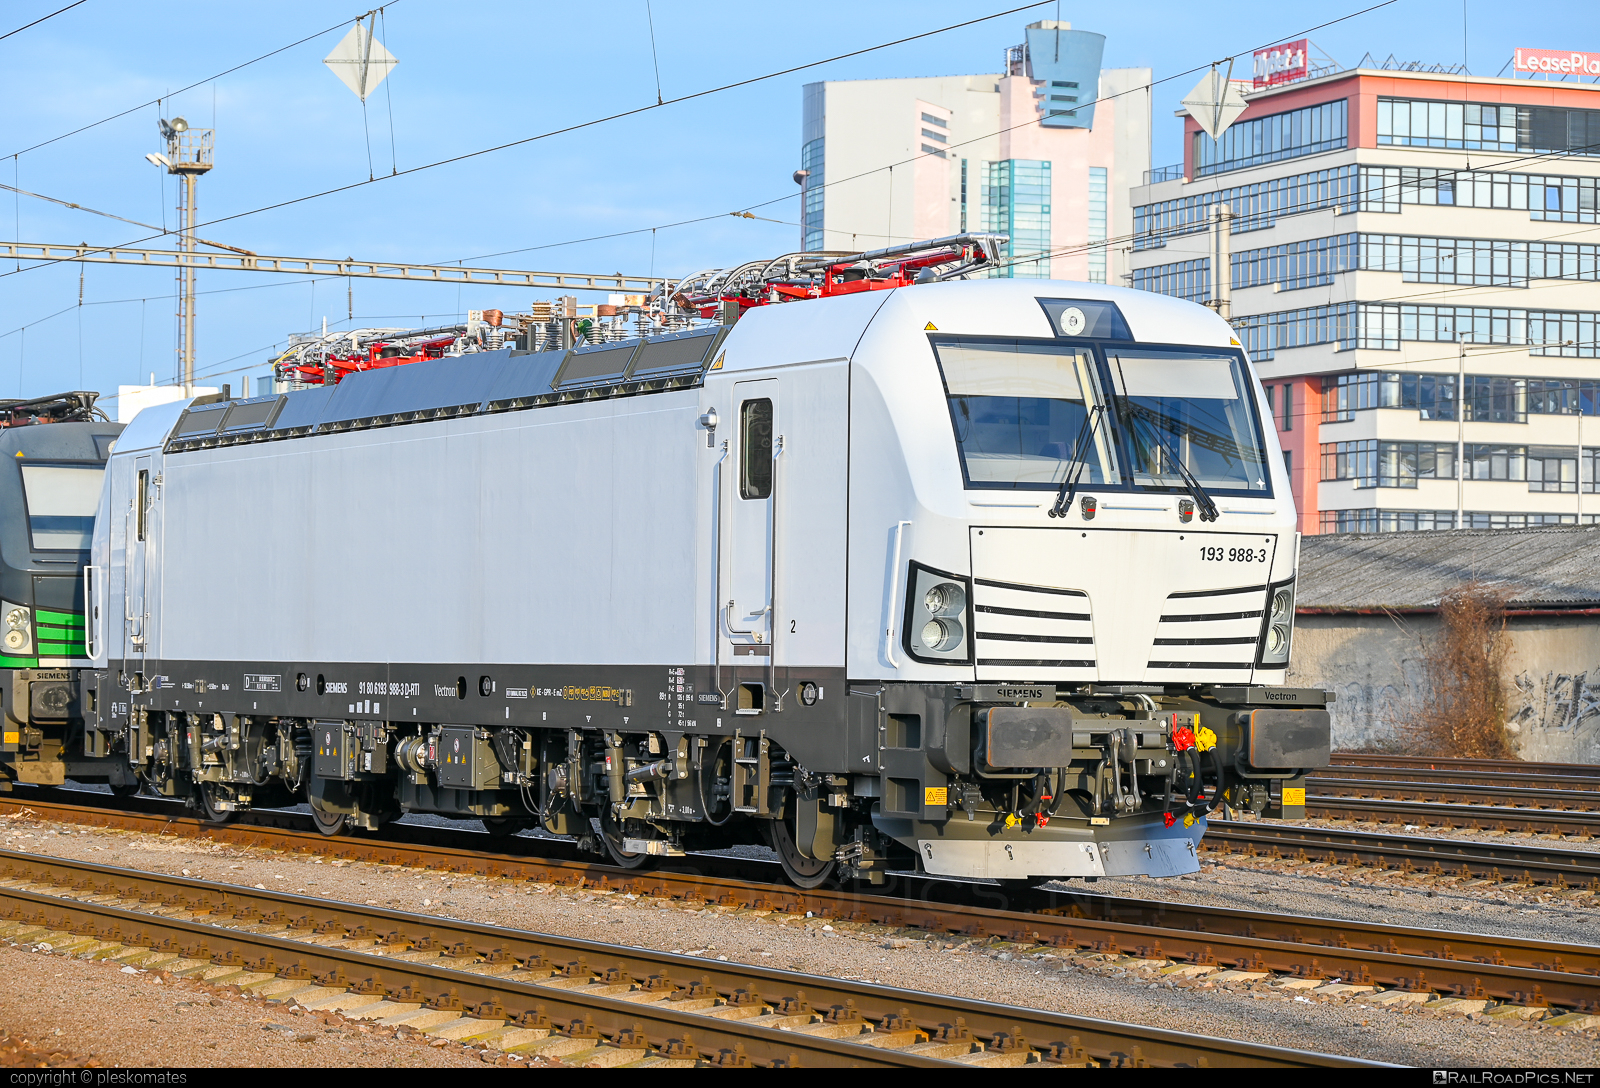 Siemens Vectron MS - 193 988-3 operated by Railtrans International, s.r.o #RailtransInternational #rti #siemens #siemensVectron #siemensVectronMS #vectron #vectronMS